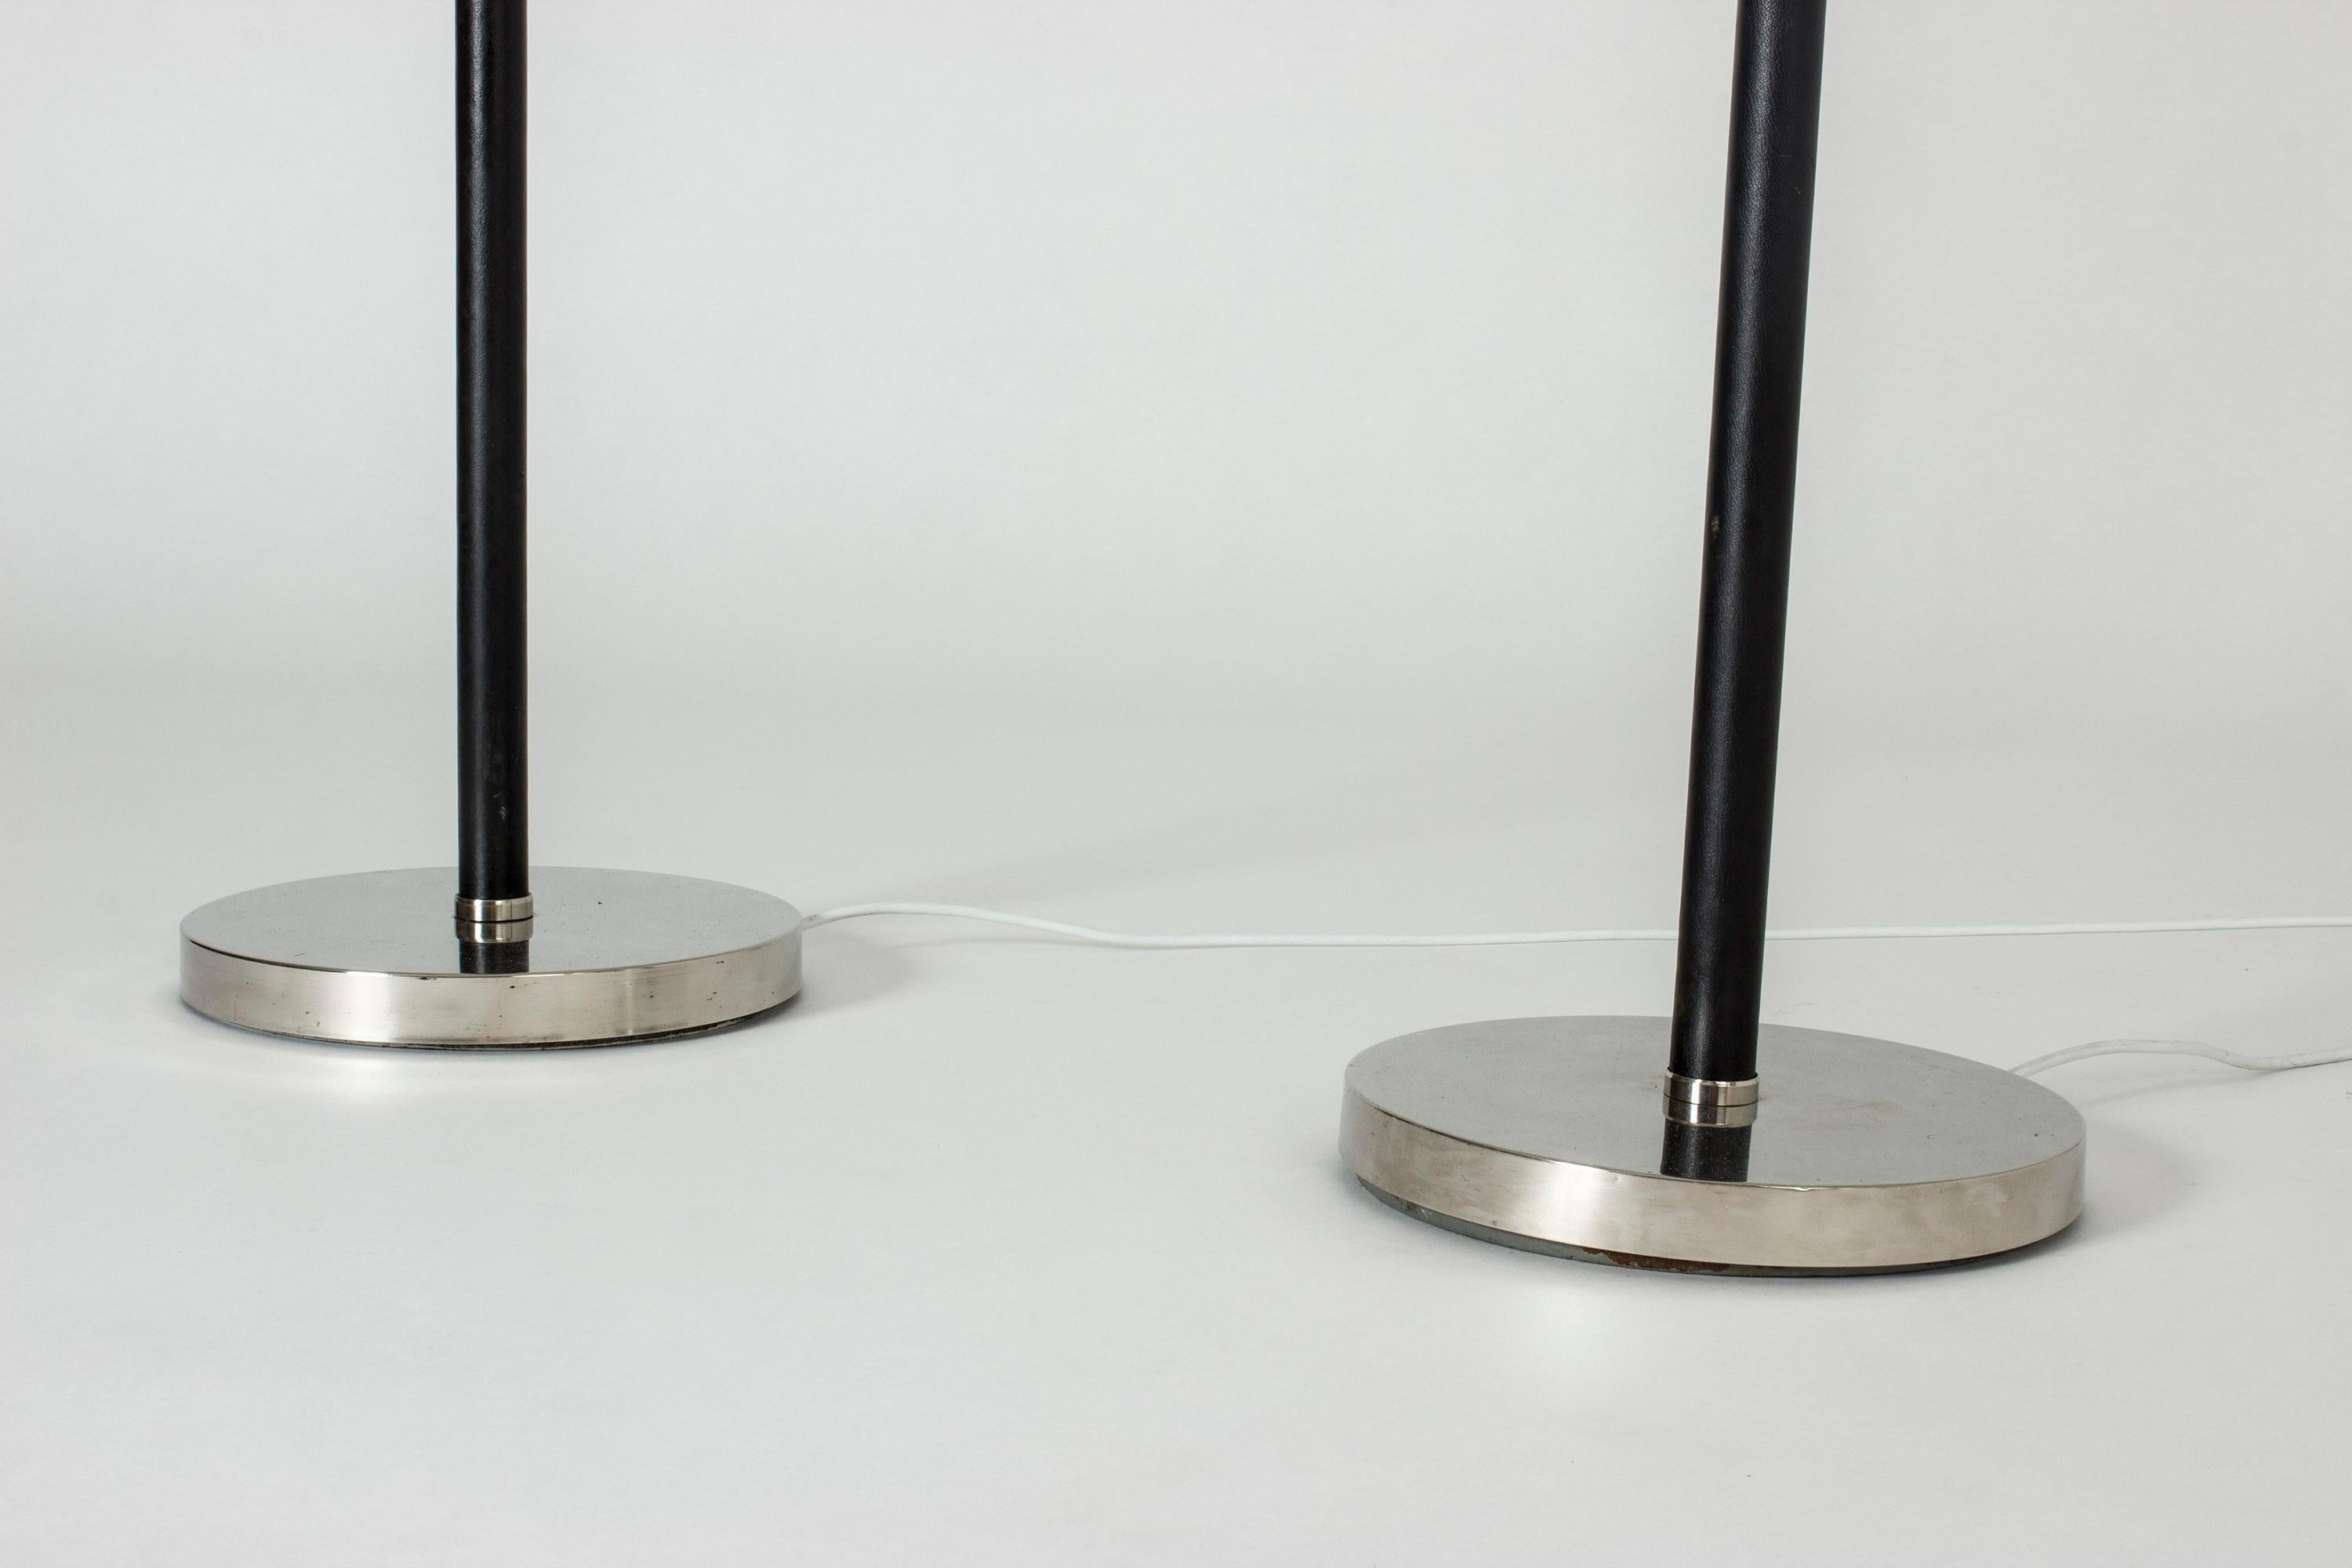 Pair of Functionalist Floor Lamps by Bertil Brisborg In Good Condition For Sale In Stockholm, SE